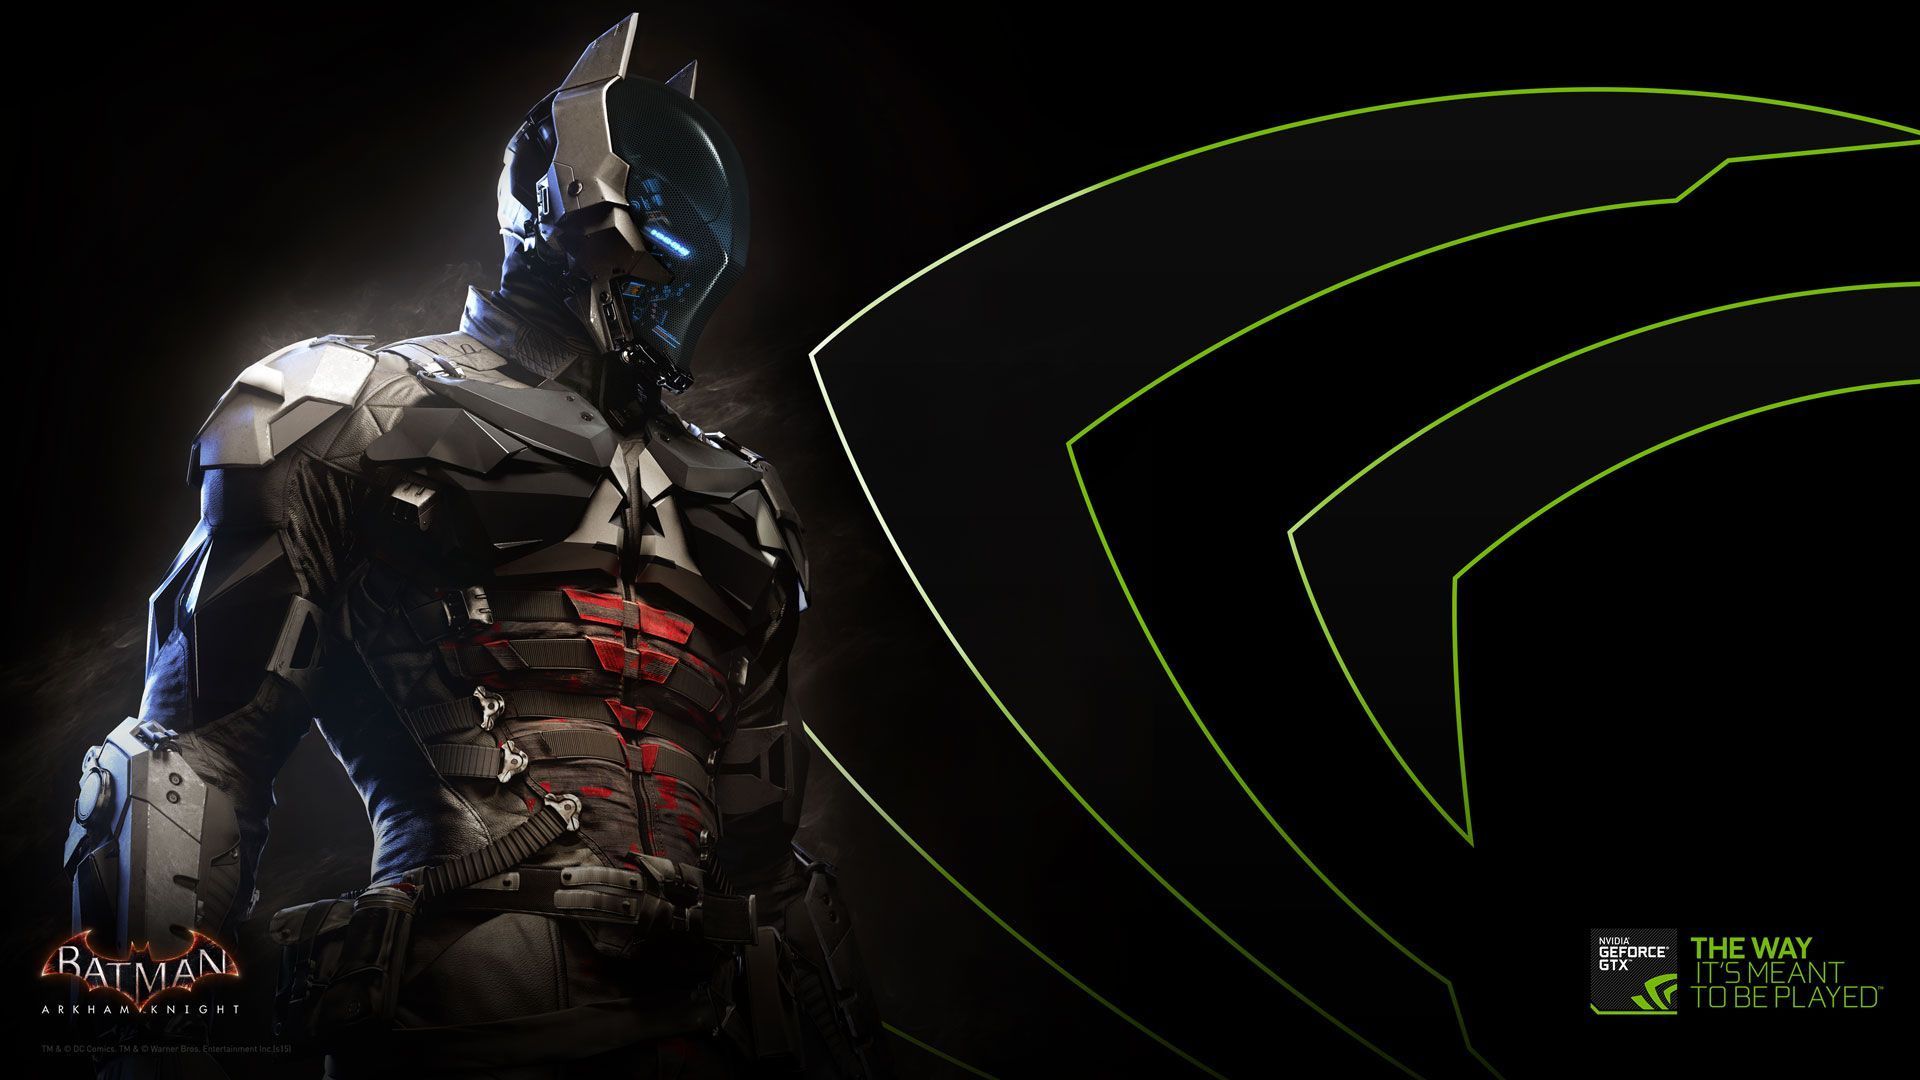 Download these Batman Arkham Knight Wallpapers GeForce